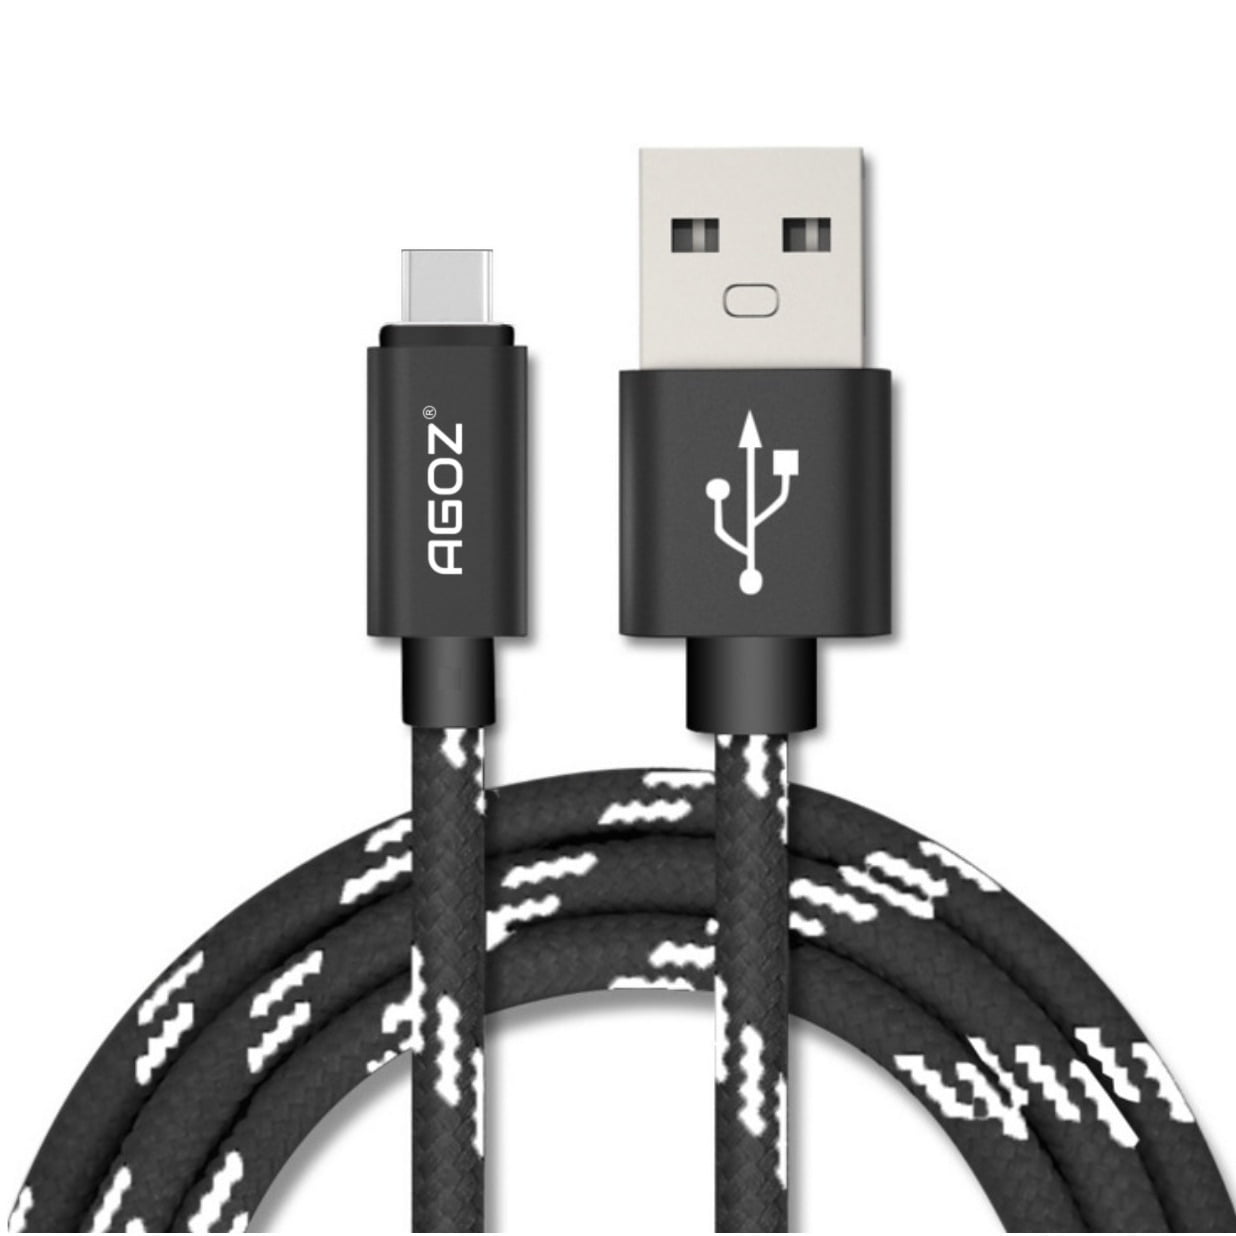 Mighty Elephantthe Square Three-in-One USB Cable is A Universal Interface Charging Cable Suitable for Various Mobile Phones and Tablets